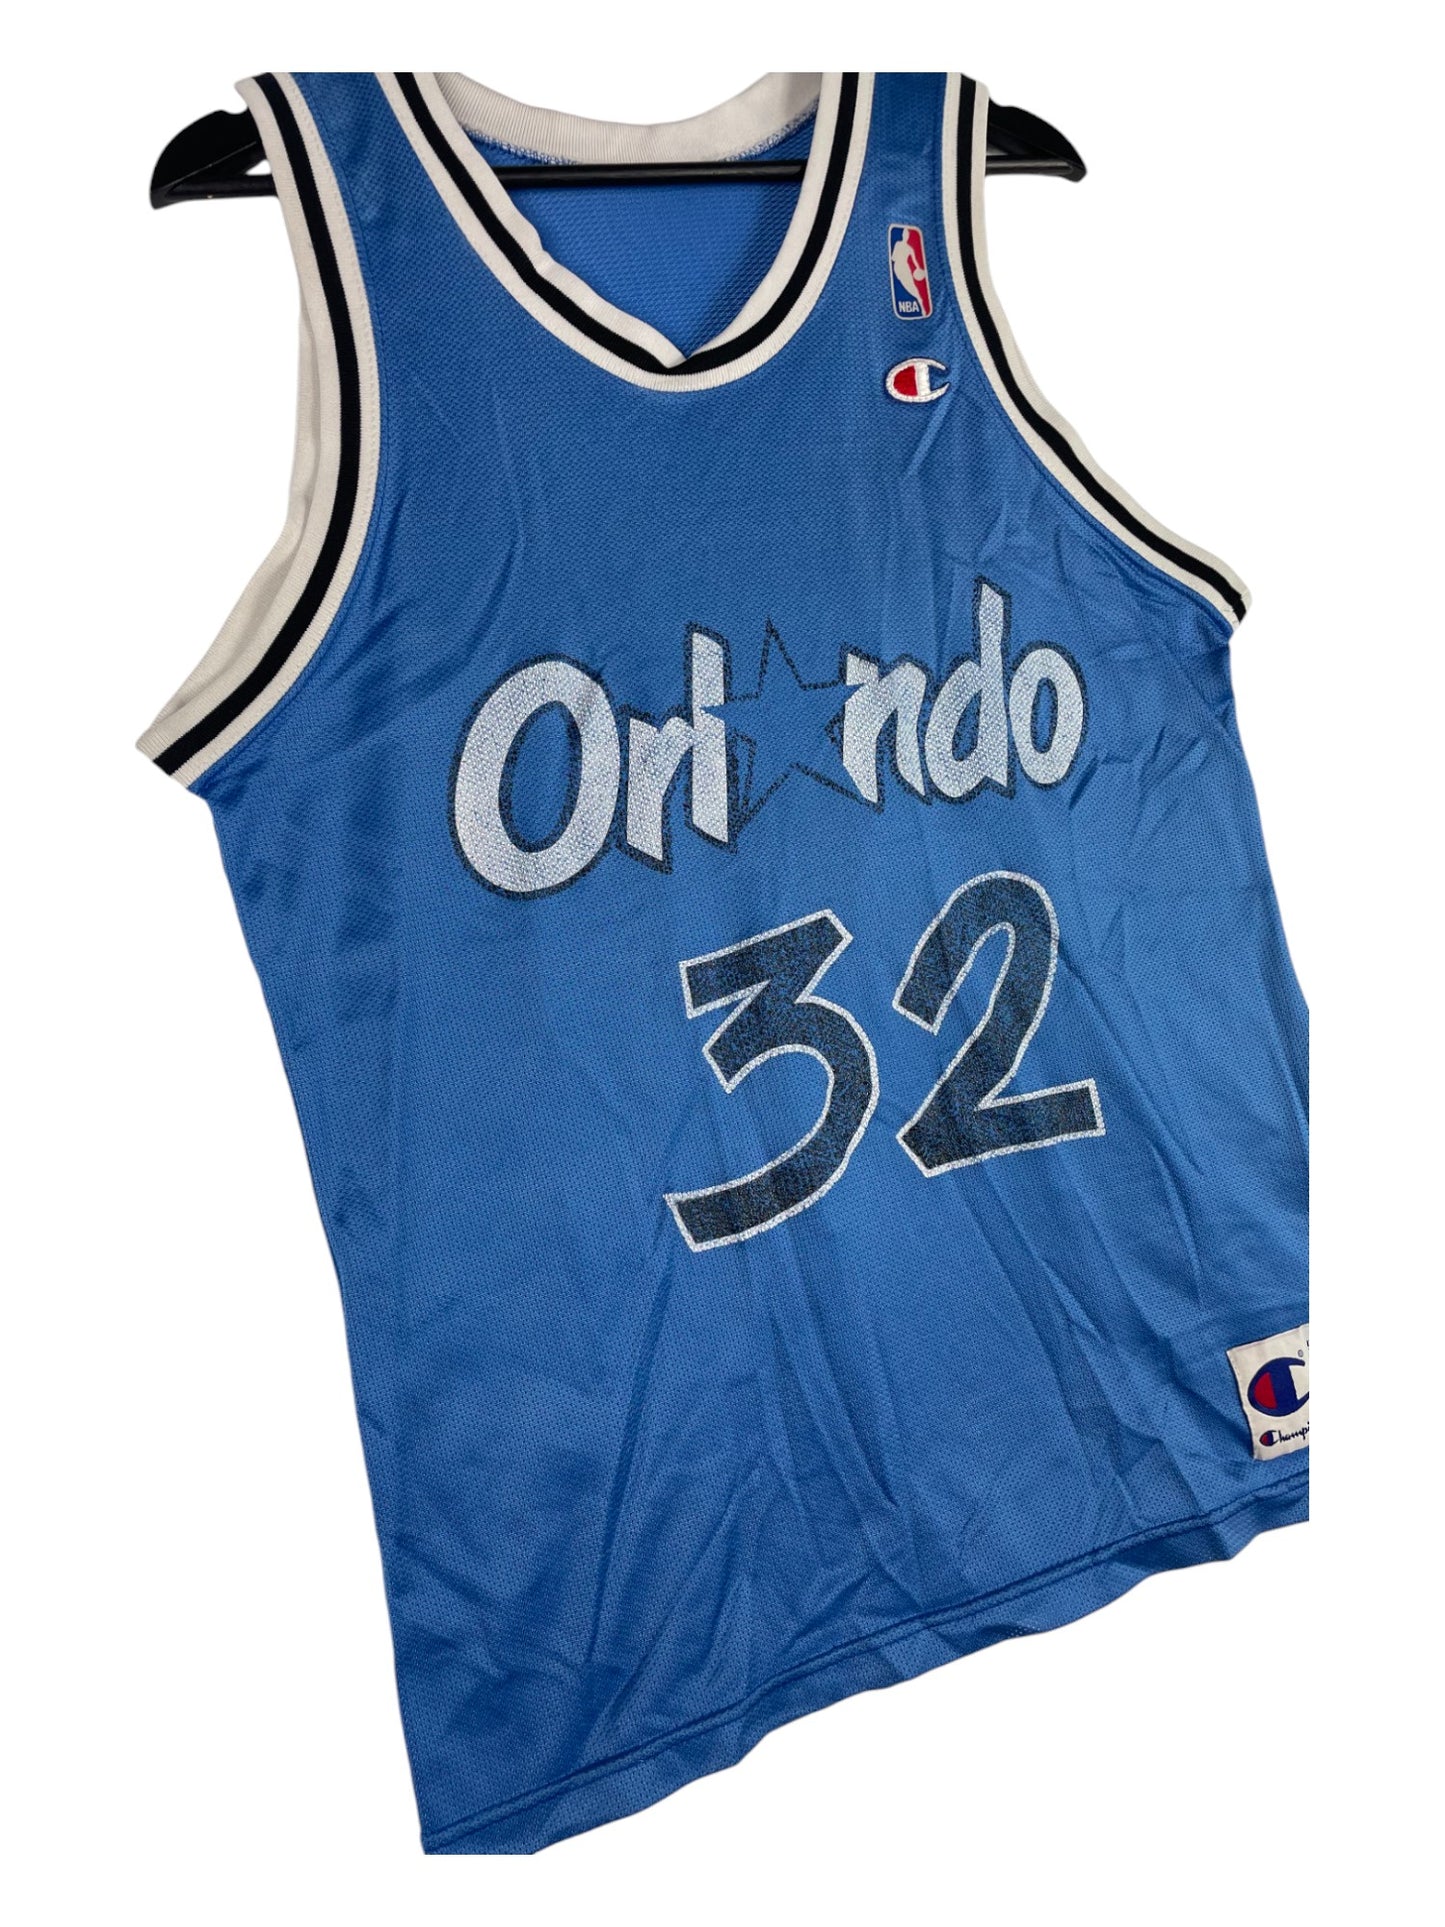 Shaquille O'Neal Basketball Jersey